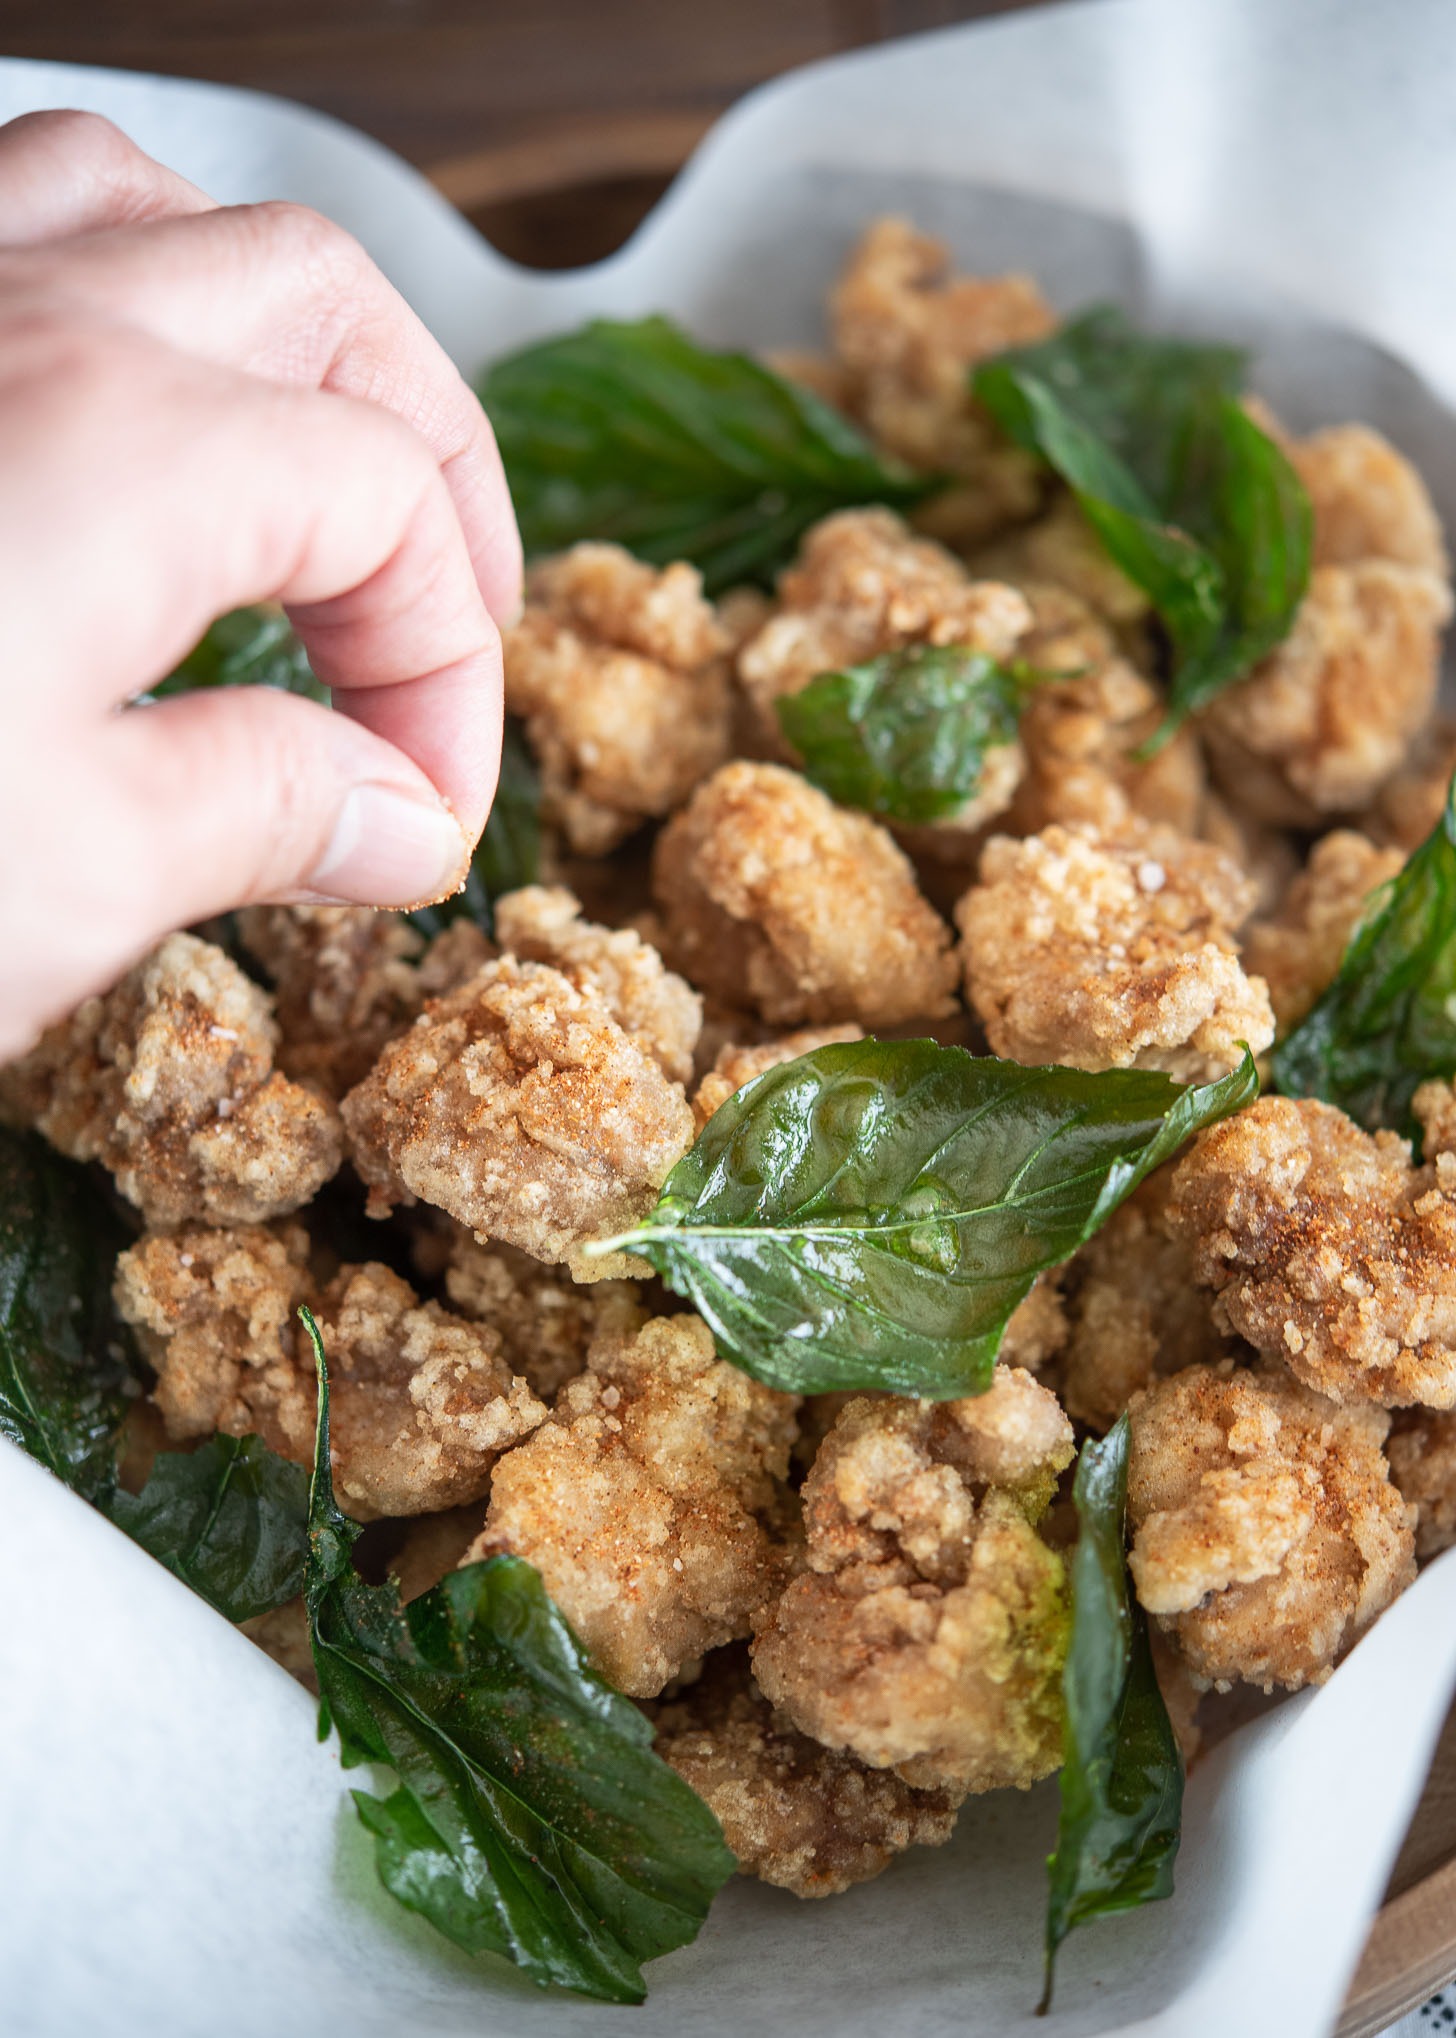 Chicken seasoning mix sprinkling over fried golden brown popcorn-sized chicken and Thai basil.